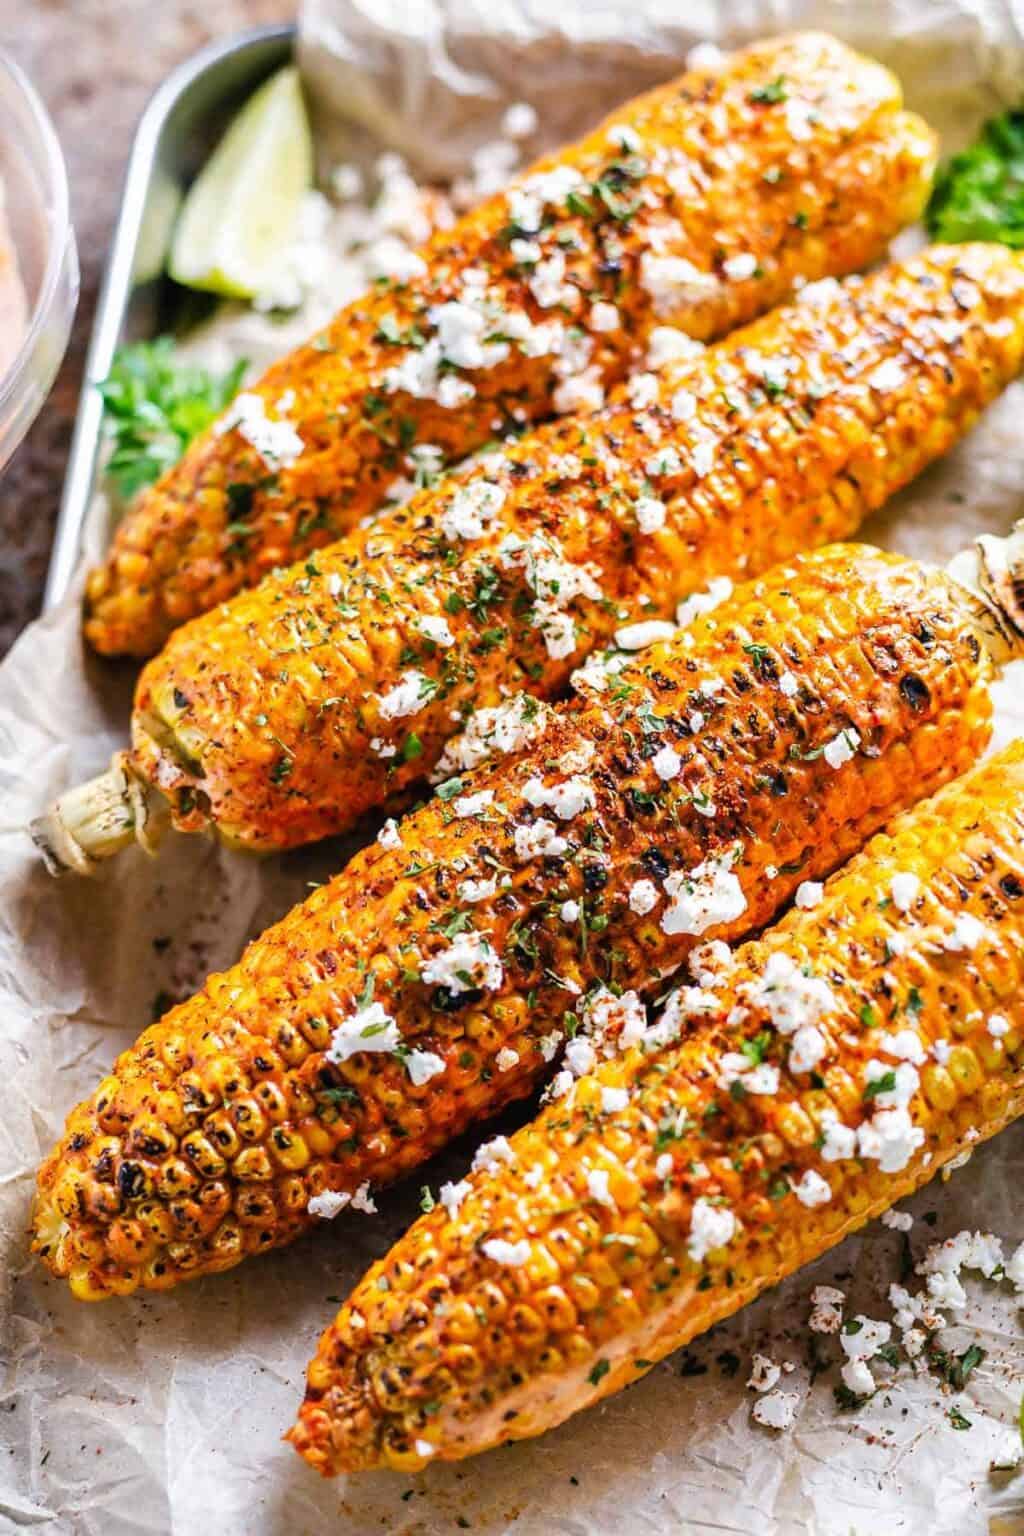 Cajun Corn On The Cob (Boiled, Baked, or On The Grill) - The Yummy Bowl